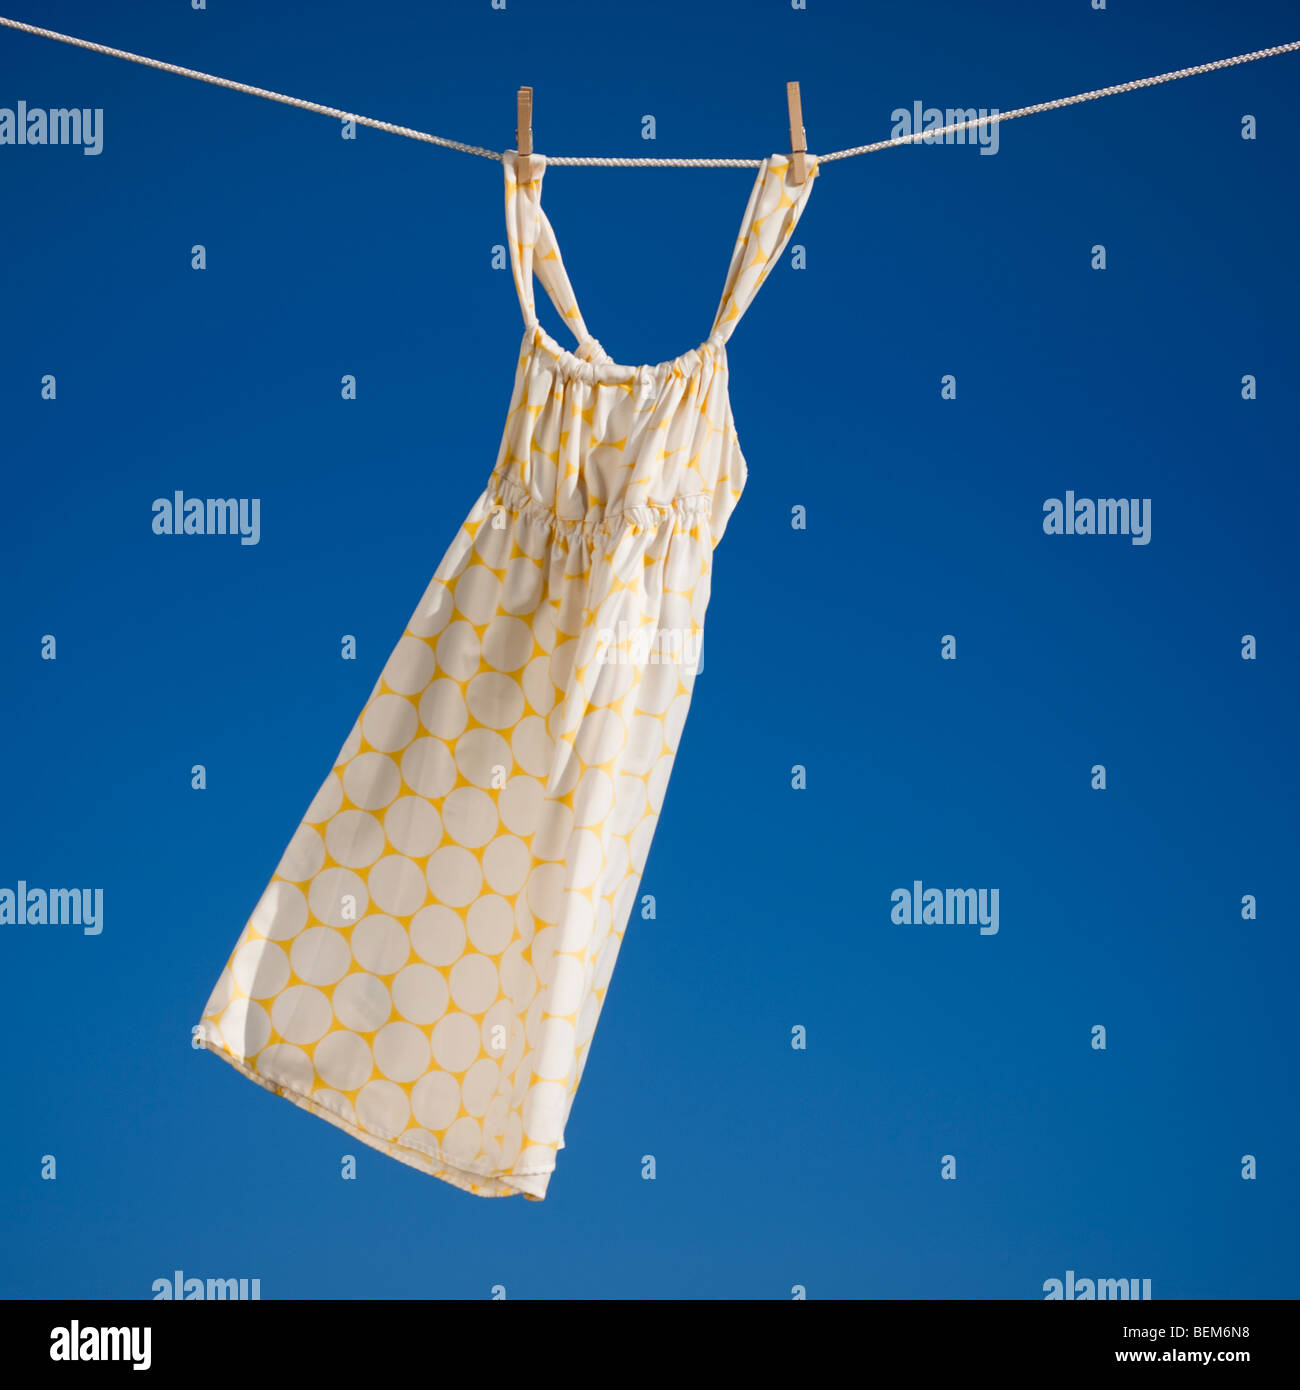 Clothes Line Dress High Resolution Stock Photography and Images - Alamy